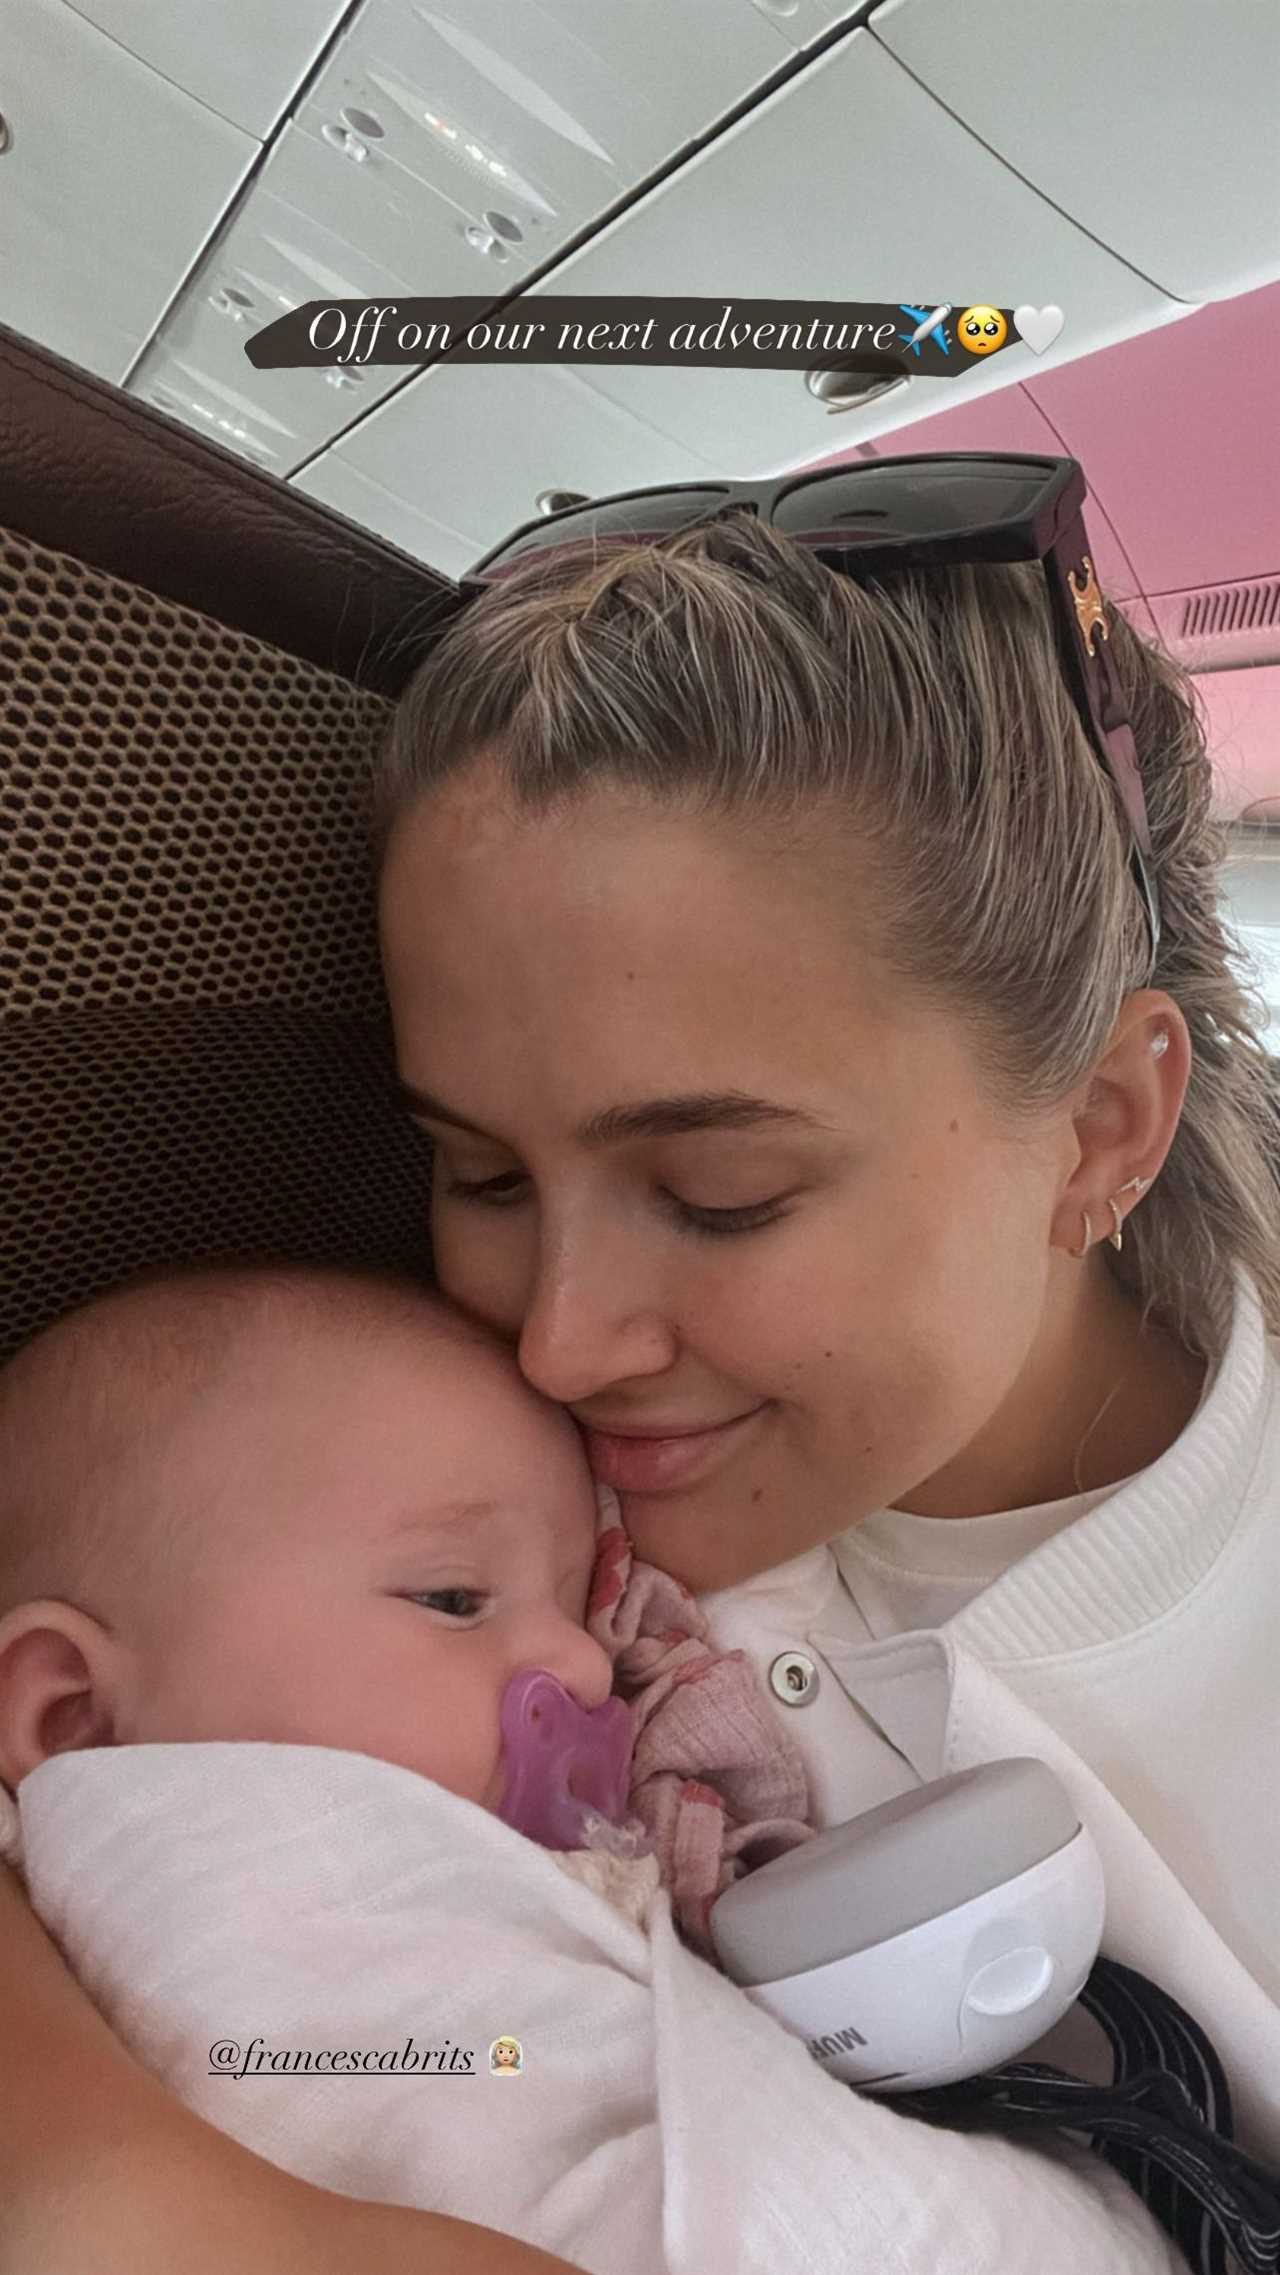 Molly-Mae Hague jets off on another trip abroad with four-month-old baby Bambi in tow